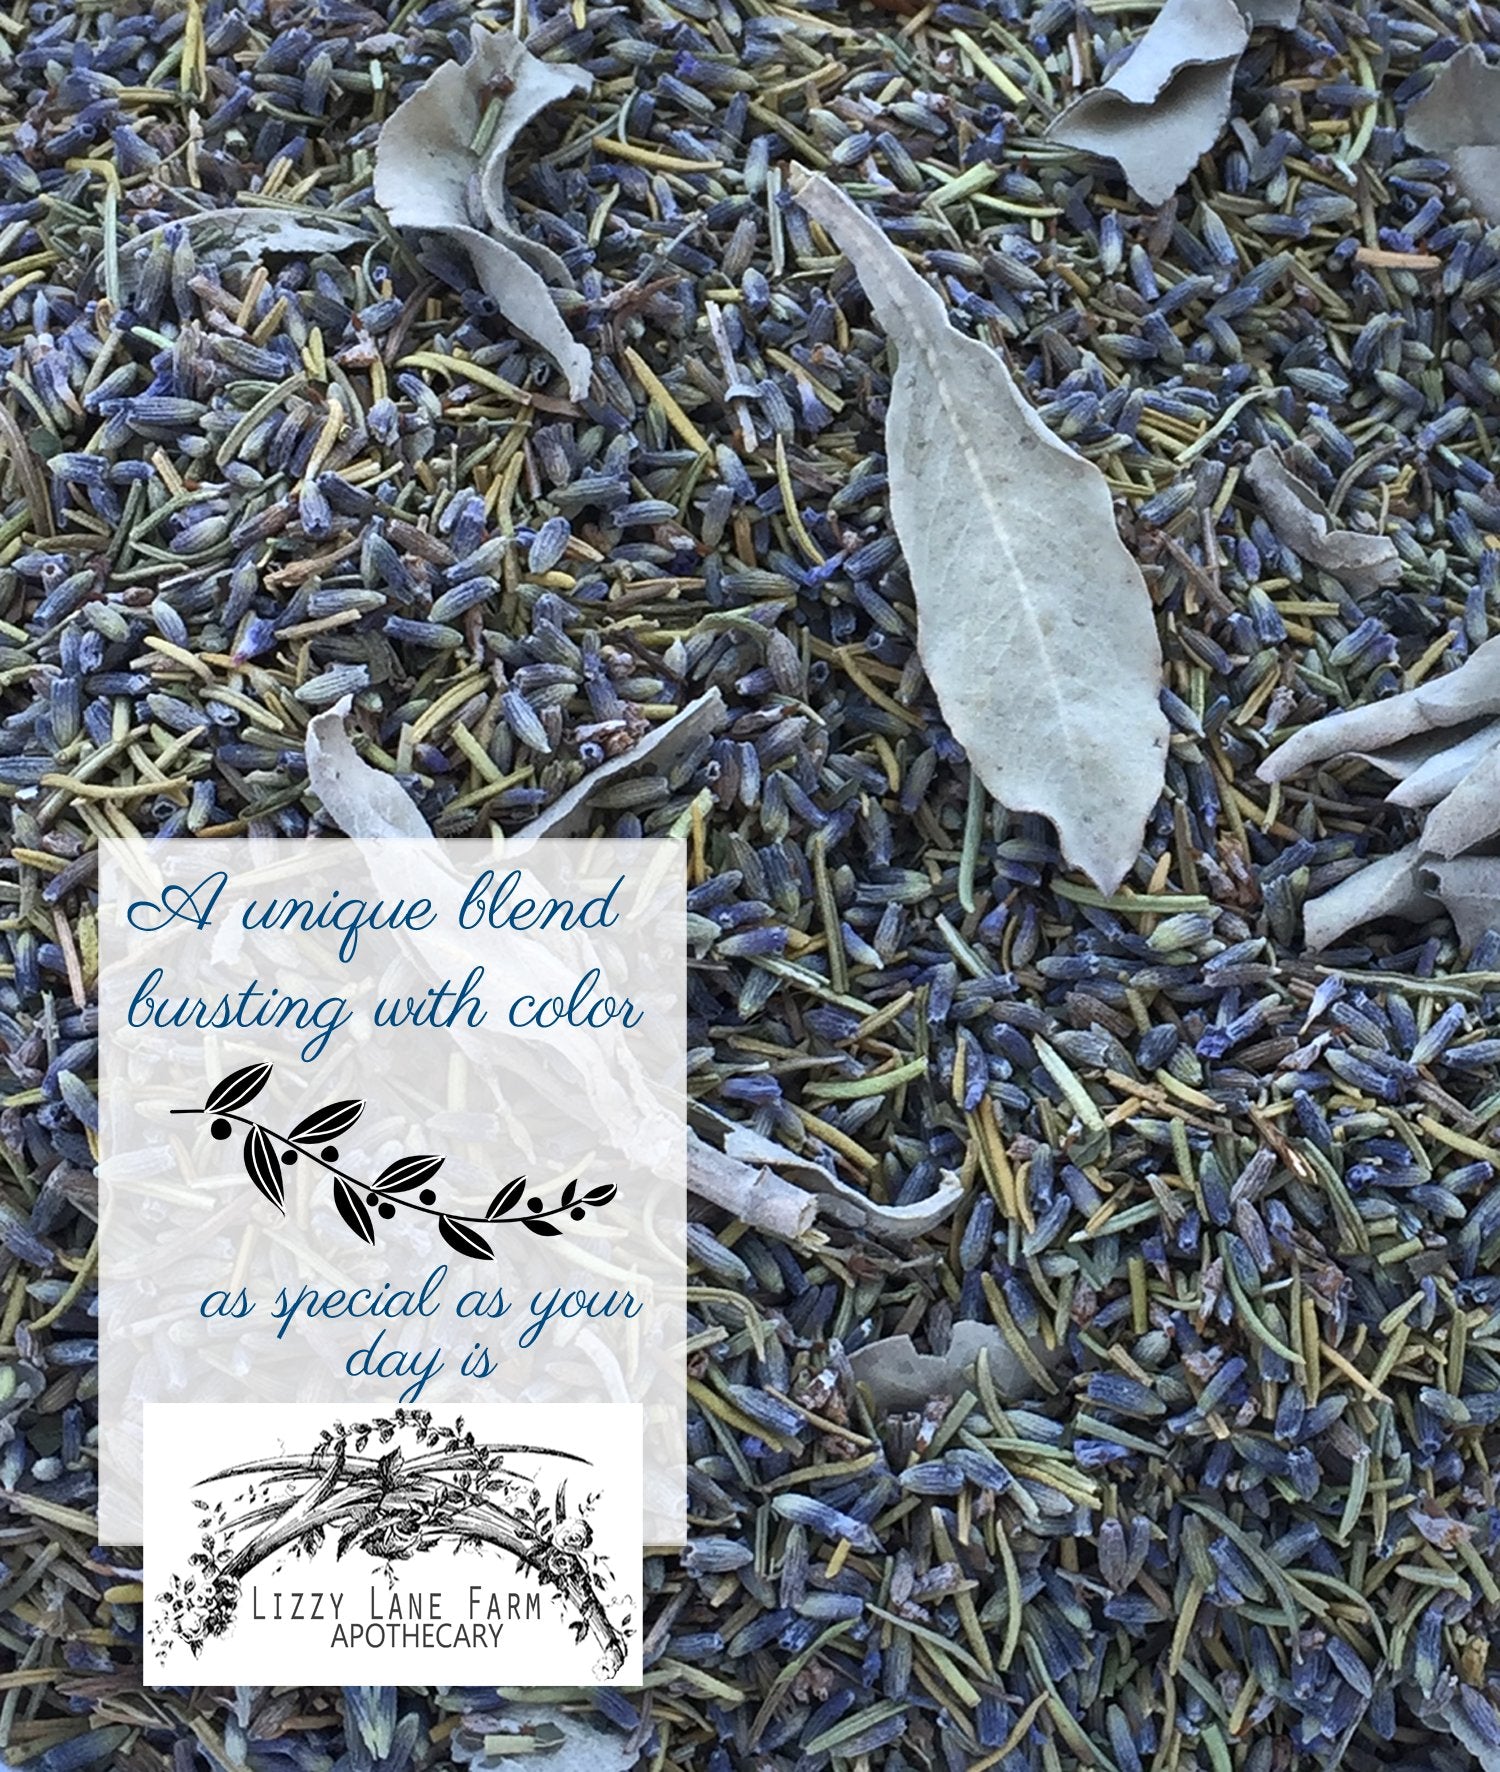 Something Blue Wedding Confetti • Wedding Toss • Real Dry Flowers • Petal Confetti- Aisle Scatter - Lizzy Lane Farm Apothecary